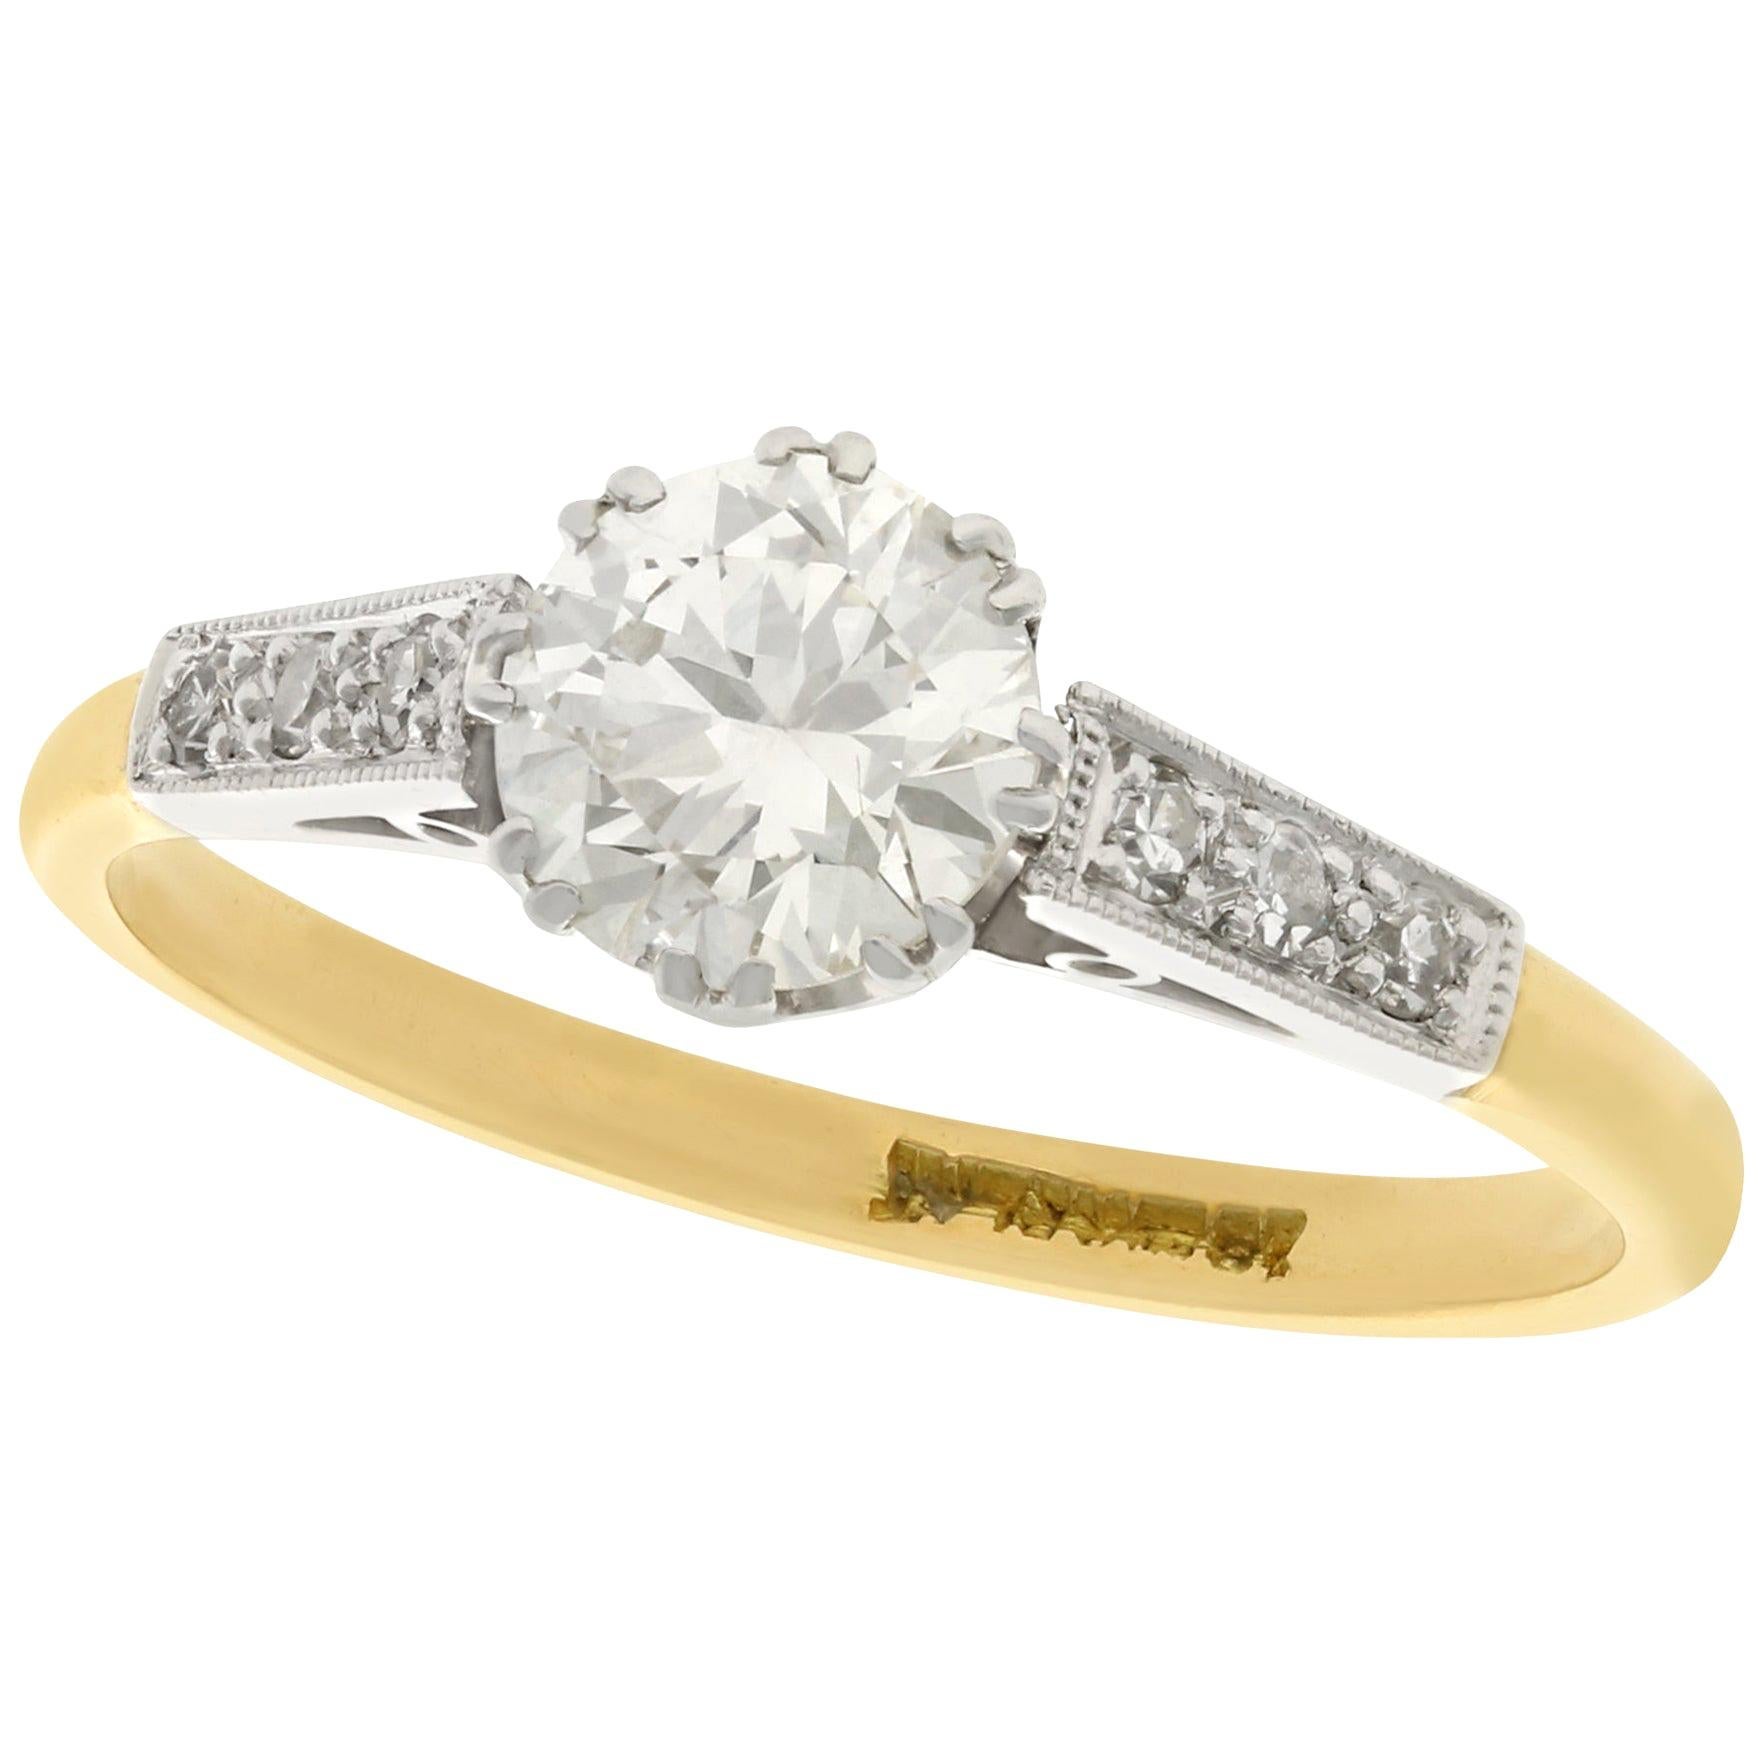 1940s Diamond and Gold Solitaire Engagement Ring